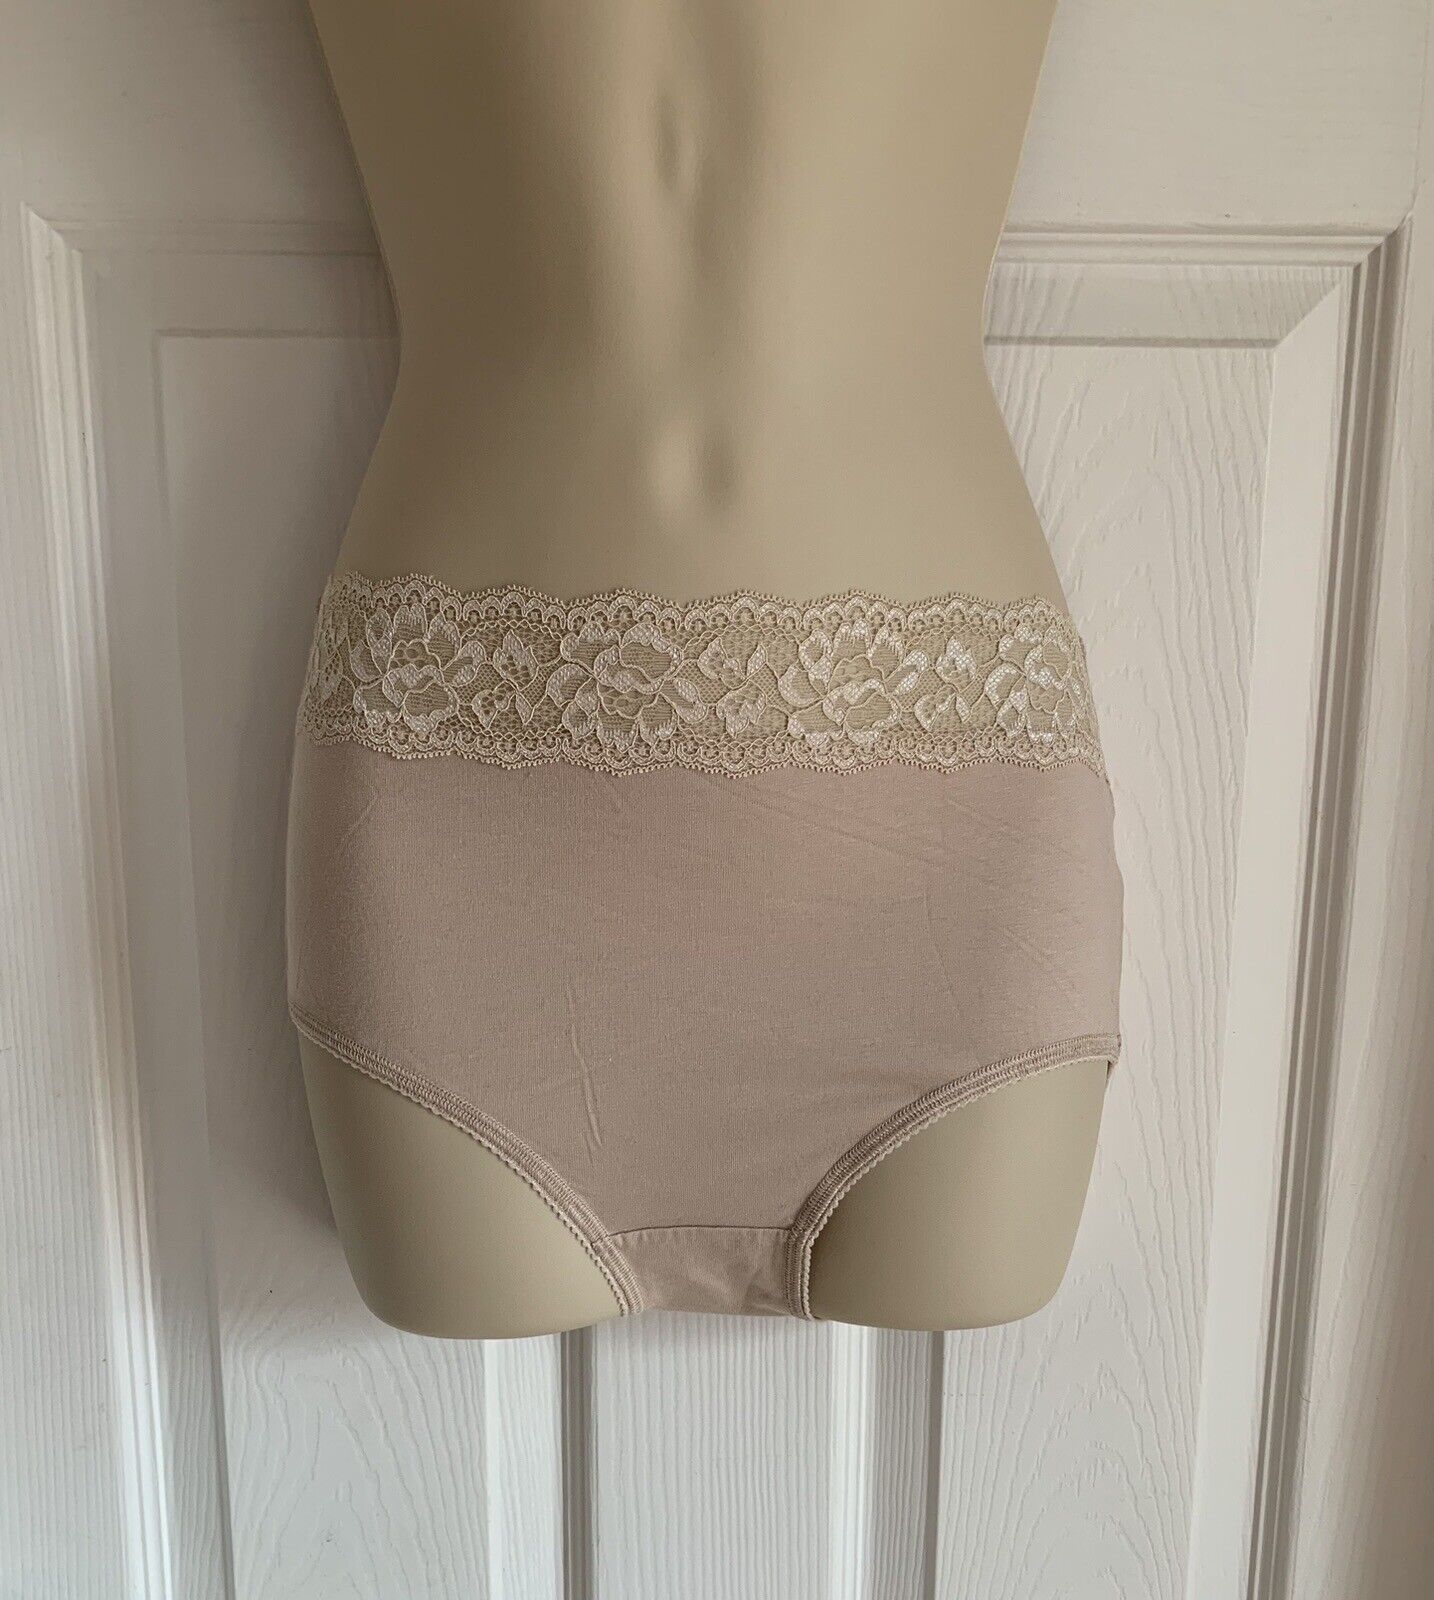 EX M*S Almond Lace High Waisted Full Briefs in Sizes 8, 10, 14, 16, 18, 26